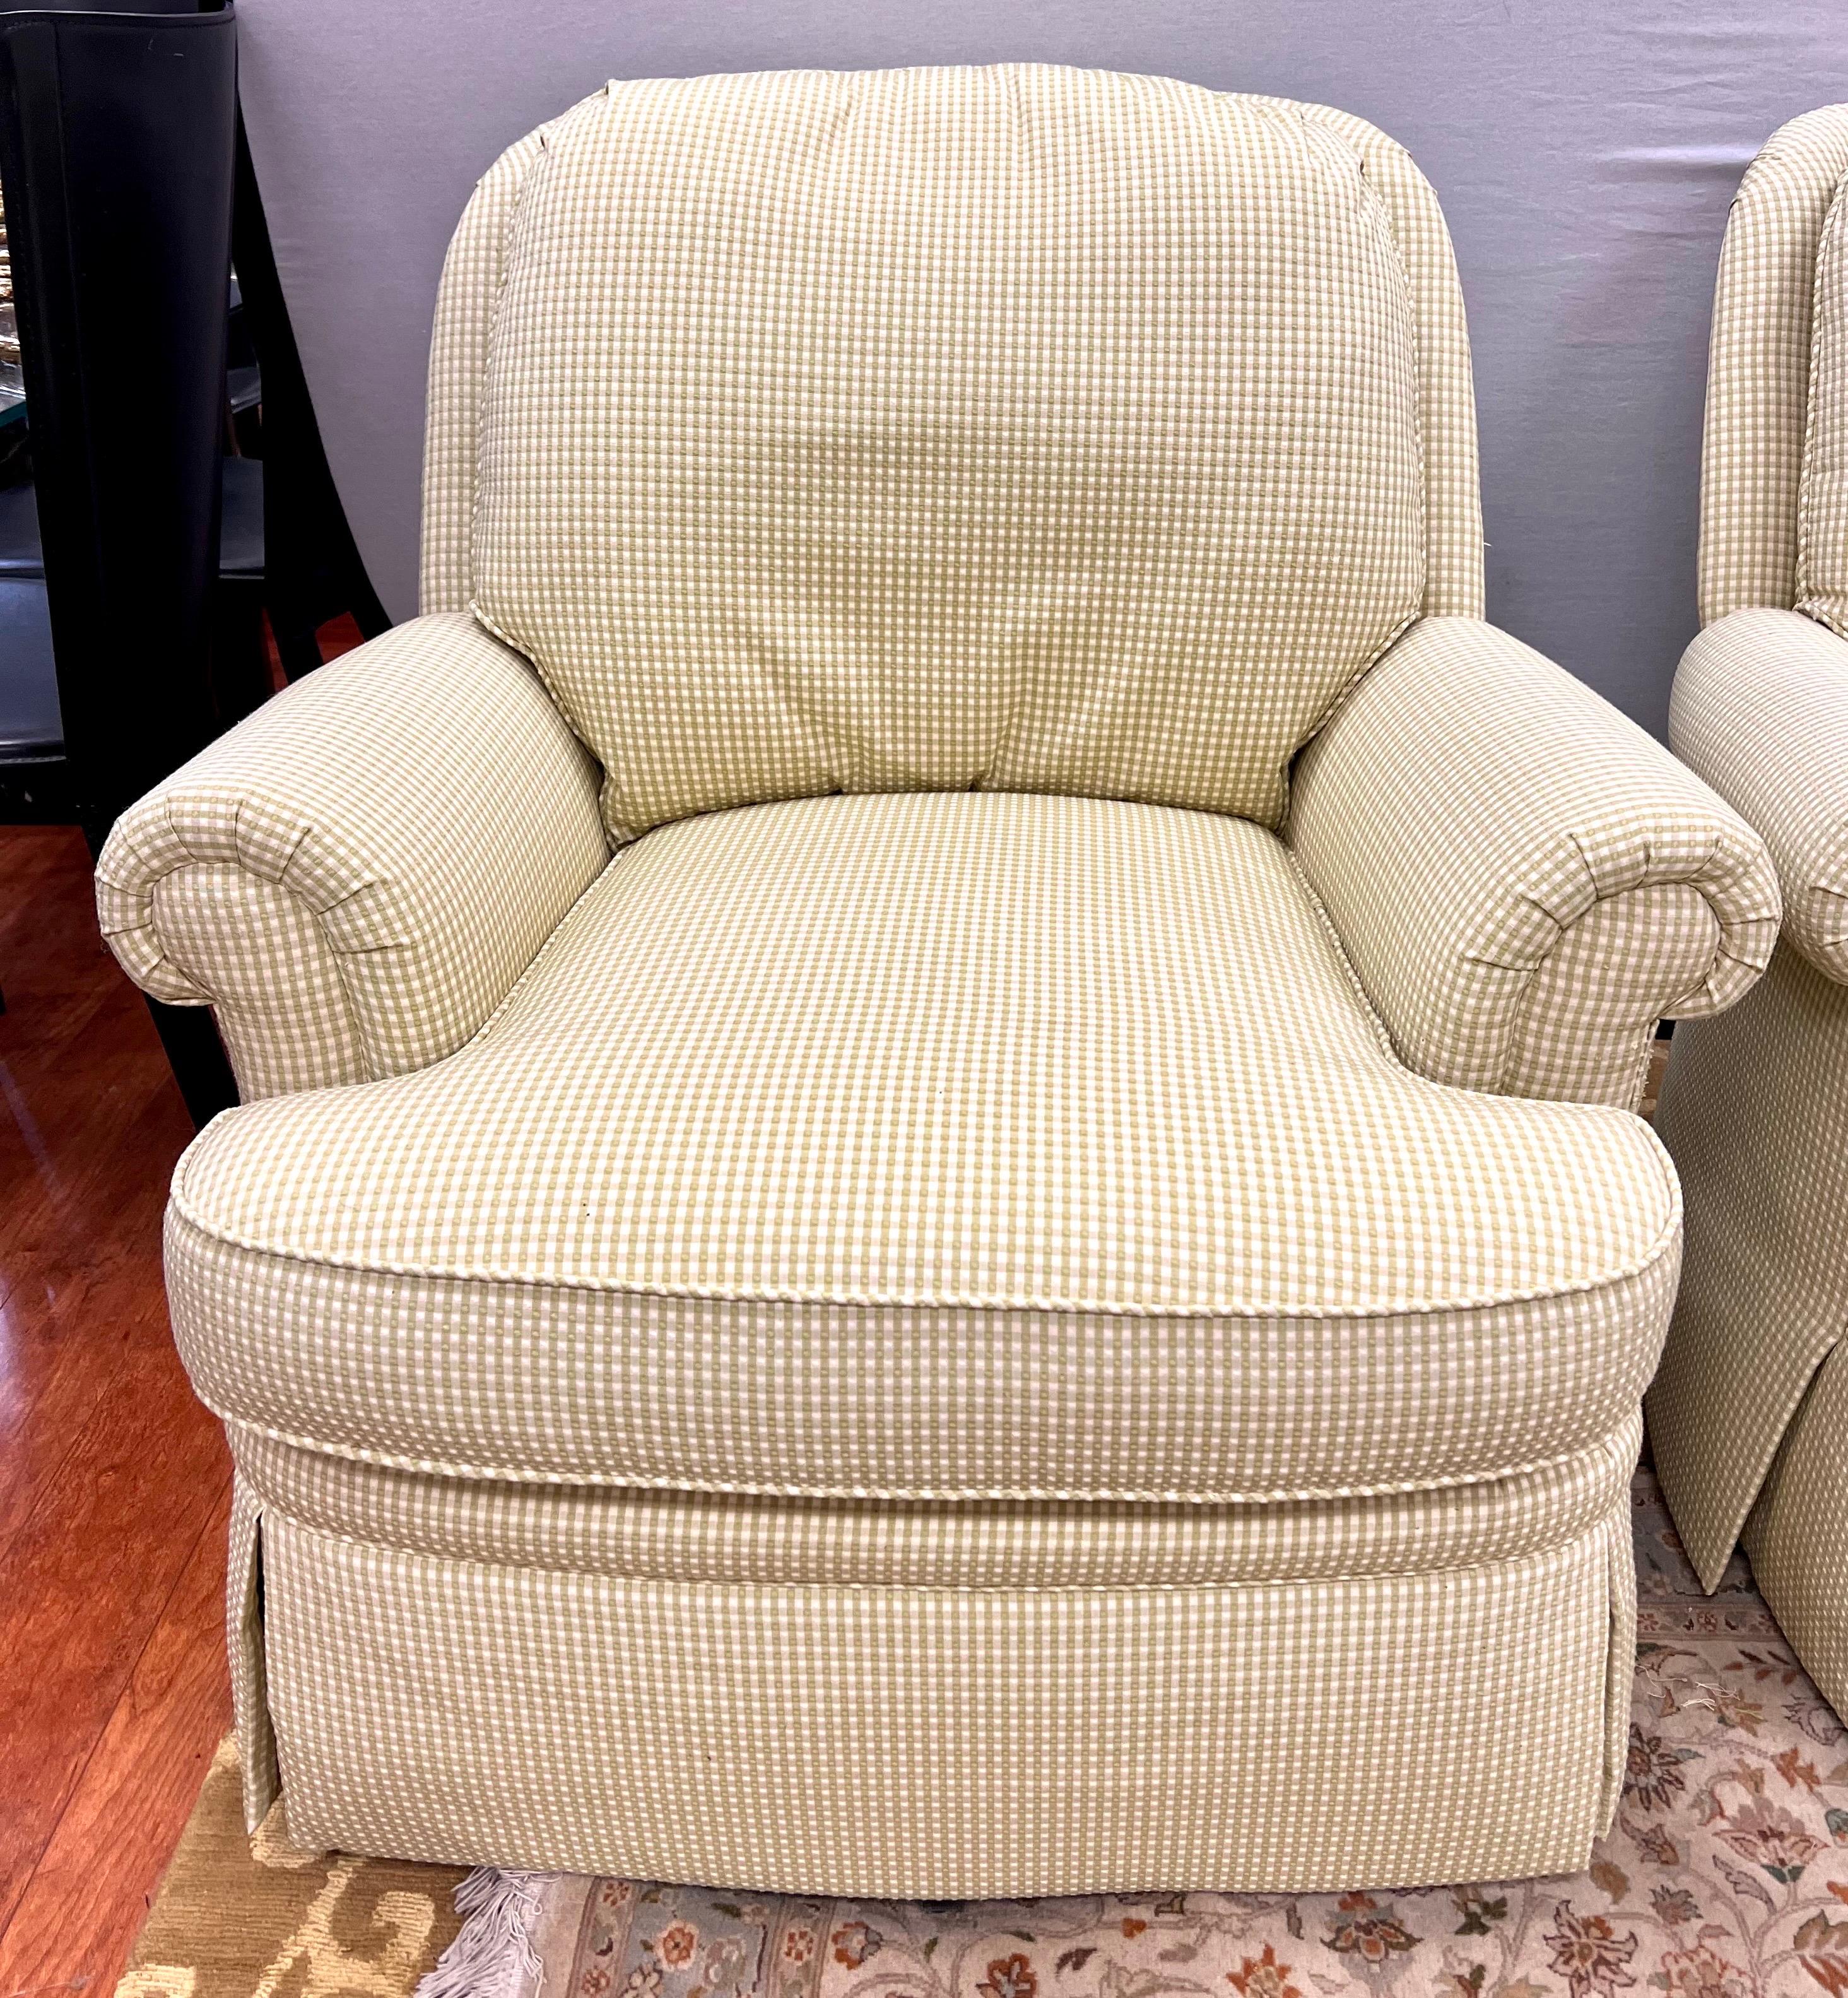 Upholstery Pair of Green Gingham Check Swivel Rocker Club Chairs